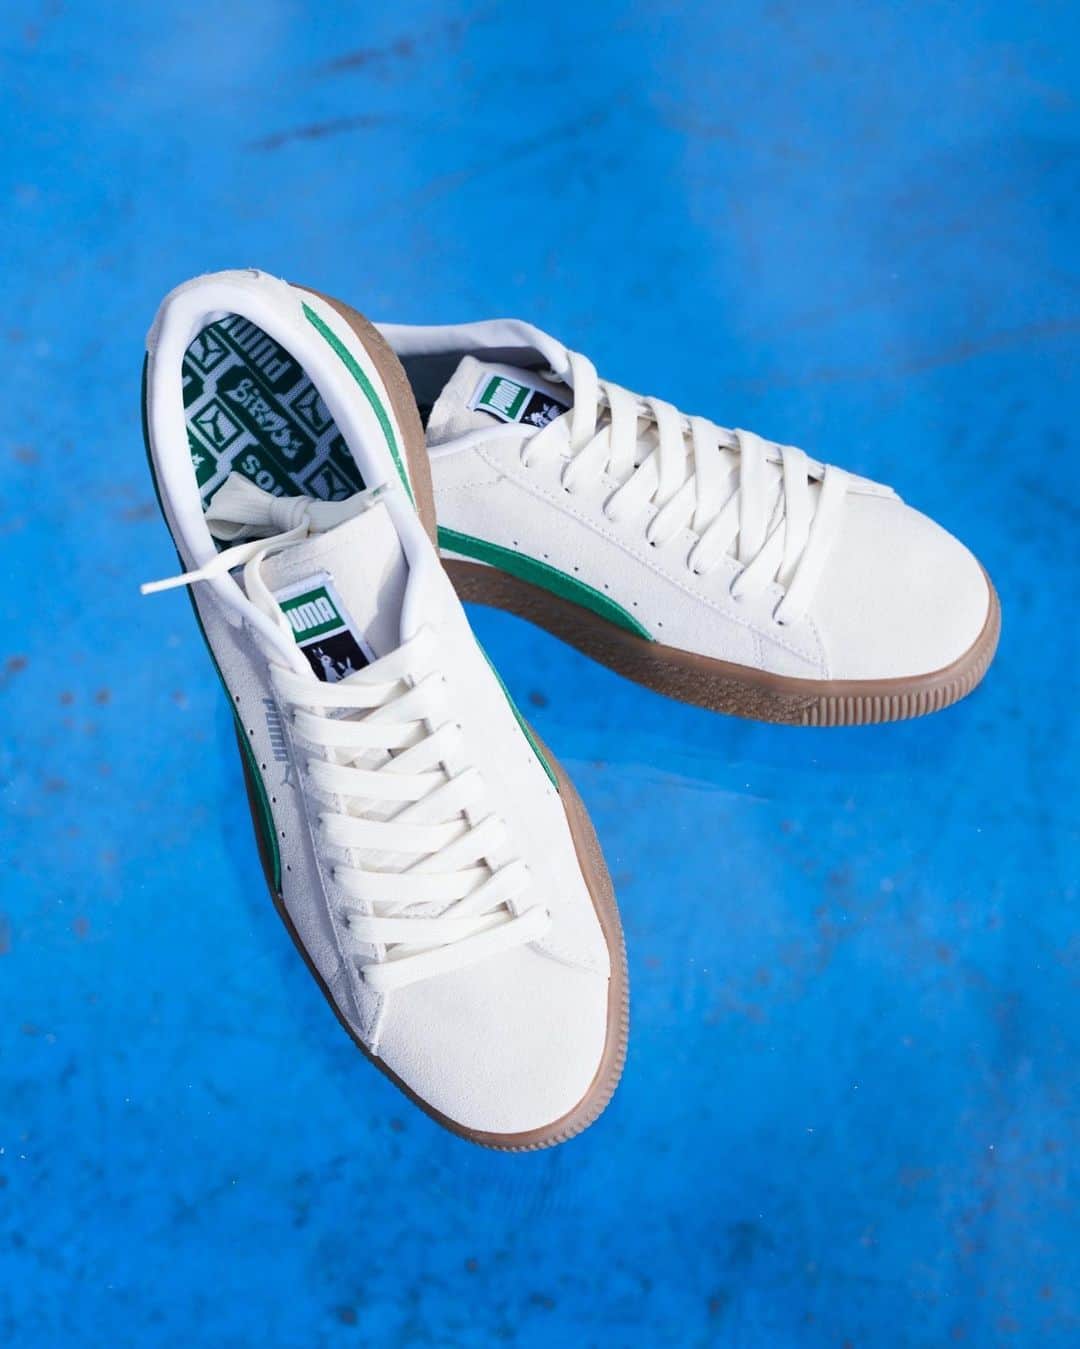 #FR2さんのインスタグラム写真 - (#FR2Instagram)「Based on PUMA SUEDE, which has been popular in various cultures for more than 50 years since the prototype PUMA CRACK in 1968, a three-party collaborative bespoke production by BIRDOG, #FR2, and atmos is being realized.  Although this SUEDE has a triple name, this product has a simple production design. It has a beige base and a foam strip with a bright green color, and characters for BIRDOG and FR2 are placed in parallel with the PUMA LOGO on the tongue part on the left and right. A design with the shop URL has been placed on the heel side to make it eye-catching. "BIRDOG," "FR2," and "atmos" are printed on the shoelace tips to show the difference between the left and right shoelaces. In addition, the insole has a special specification with the CAT LOGO, #FR2, and BIRDOG script logos lined up.  The main visual is the popular YouTuber Comdot. BIRDOG, who advocates "making the clothes we want to wear, while also breaking the common sense of the apparel industry," and they, who produced BIRDOG and lead the youths of Japan at the forefront, are YouTubers who are attracting the most attention in the street scene.  This product will be on sale at #FR2 stores from Saturday, March 18th, 2023.  ■Release details #FR2 ONLINE STORE March 18th (Sat), 2023, 12:00 AM JST  #FR2 directly managed store March 18th (Sat), 2023 OPEN *Purchase restrictions may be set for sales at stores.  "PUMA SUEDE VTG ATMOS BIRDOG FR2"  1968年に原型となるPUMA CRACKが登場して以後、50年以上にわたって様々なカルチャーにおいて人気を博しているPUMA SUEDEをベースに、「BIRDOG」、「#FR2」、「atmos」による3者共同製作の別注が実現。 トリプルネームのSUEDEながらもシンプルに製作デザインされた今作は、ベージュをベースにフォームストリップに鮮やかなグリーンを組み合わせており、シュータン部には左右でBIRDOG,FR2のキャラクターをPUMA LOGOと並列。ヒールサイドにはショップURLを入れたデザインを配置し目を惹きつけられる仕様に。 シューレースチップには「BIRDOG」「FR2」「atmos」と左右のシューレースで違いを魅せ印字。 さらに、インソールにはCAT LOGO、#FR2、BIRDOGのスクリプトロゴが並んだ特別仕様となっております。 メインビジュアルには大人気YouTuberである「コムドット」を起用。 「自分たちが着たい服を造る、ついでにアパレル業界の常識をぶっ壊す」と掲げるBIRDOG、そしてBIRDOGをプロデュースし日本の若者を最先端で引っ張る彼らはストリートシーンにおいても最も注目されるYouTuberである。 本商品は2023年3月18日(土)より#FR2 各店での発売になります。  ■発売詳細 #FR2 ONLINE STORE 2023/3/18（土） 0時〜  #FR2直営店 2023/3/18（土） OPEN ※店舗での販売は購入制限を設ける場合があります。  We ship worldwide.  #FR2#fxxkingrabbits#頭狂色情兎#puma#pumasuede#birdog#atmos#puma#pumasuede」3月10日 20時54分 - fxxkingrabbits